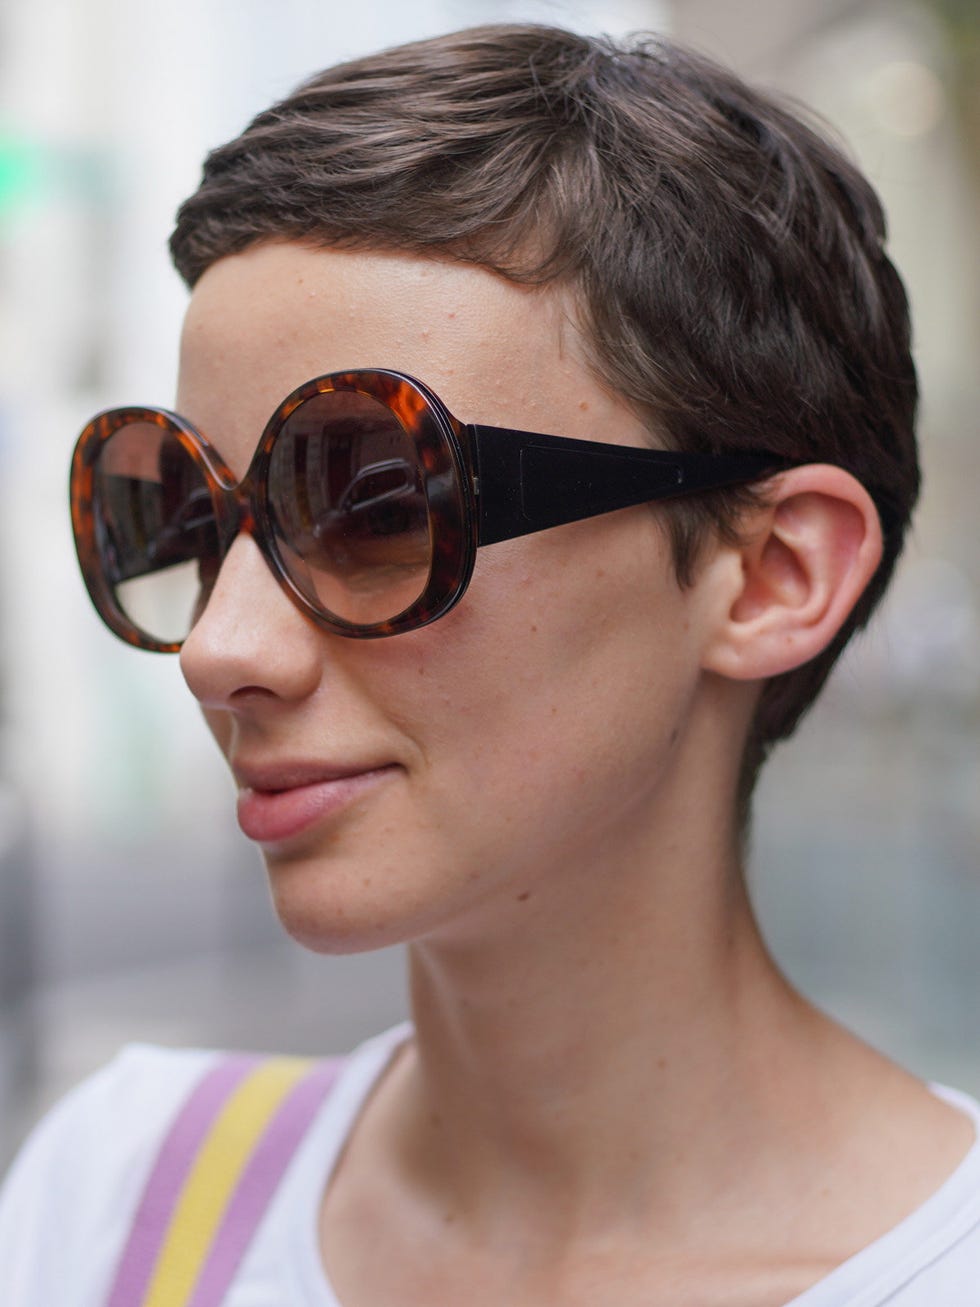 Eyewear, Glasses, Ear, Vision care, Lip, Goggles, Hairstyle, Chin, Forehead, Sunglasses, 